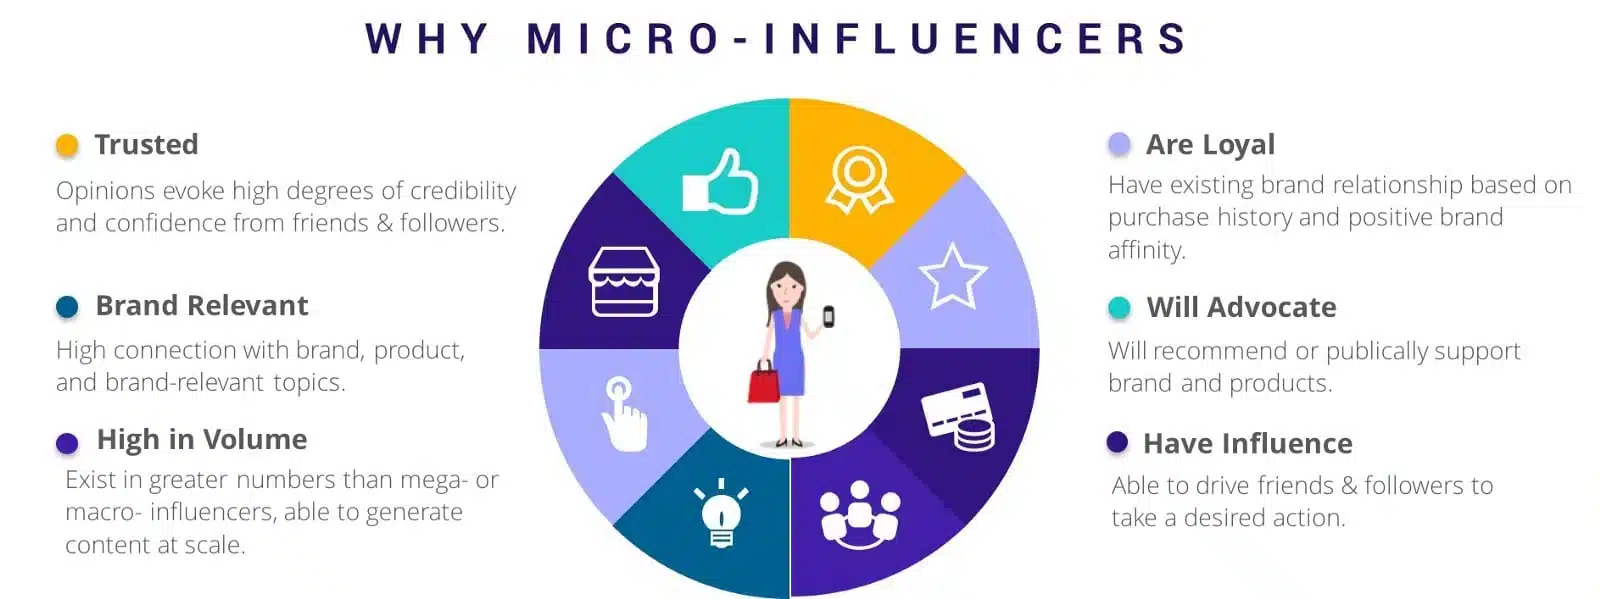 Micro-influencers can boost your lead generation through blogging.